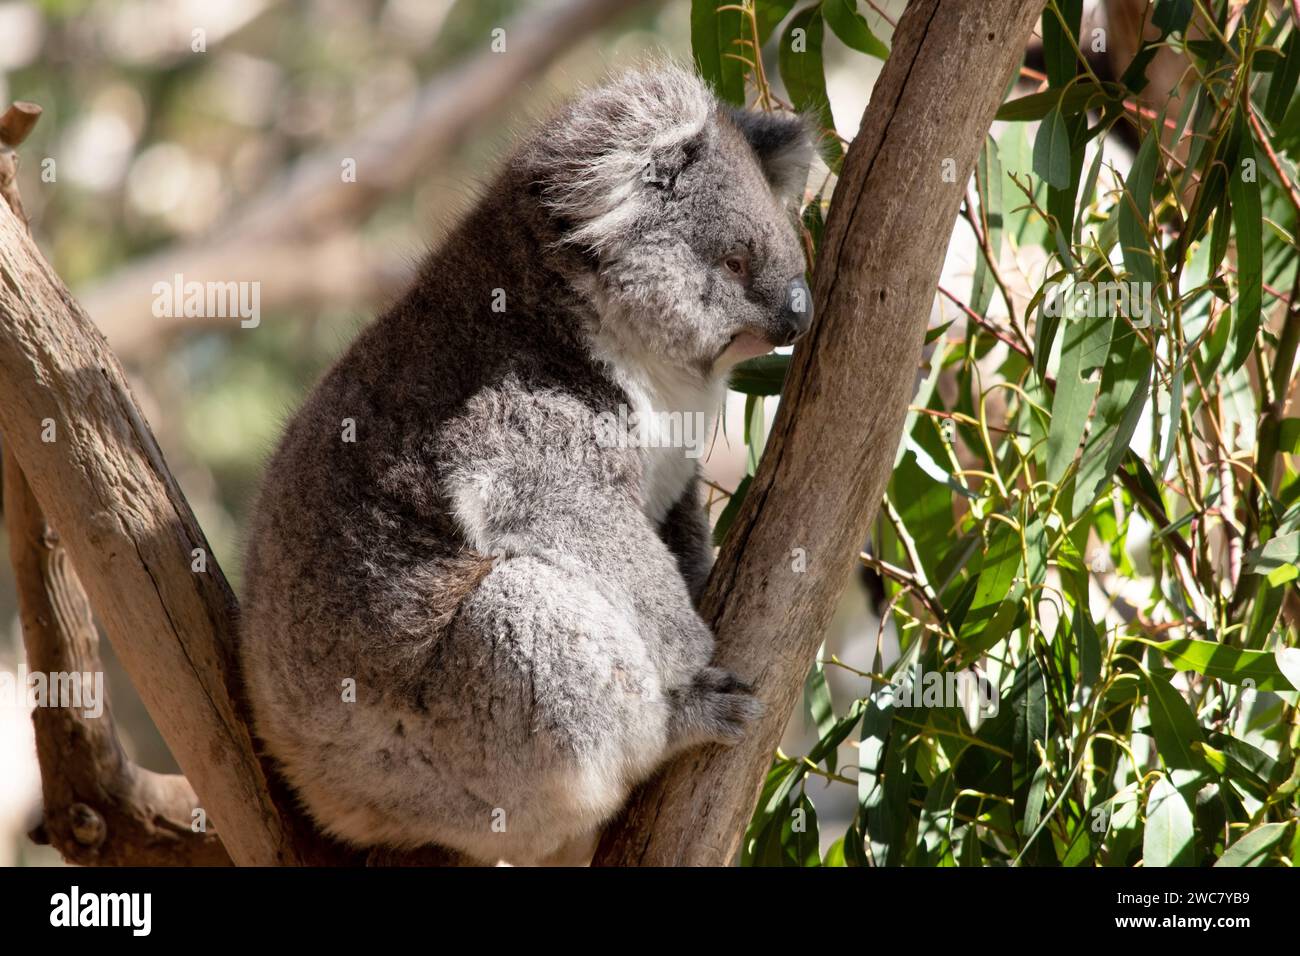 the Koala has a large round head, big furry ears and big black nose. Their fur is usually grey-brown in color with white fur on the chest, inner arms, Stock Photo